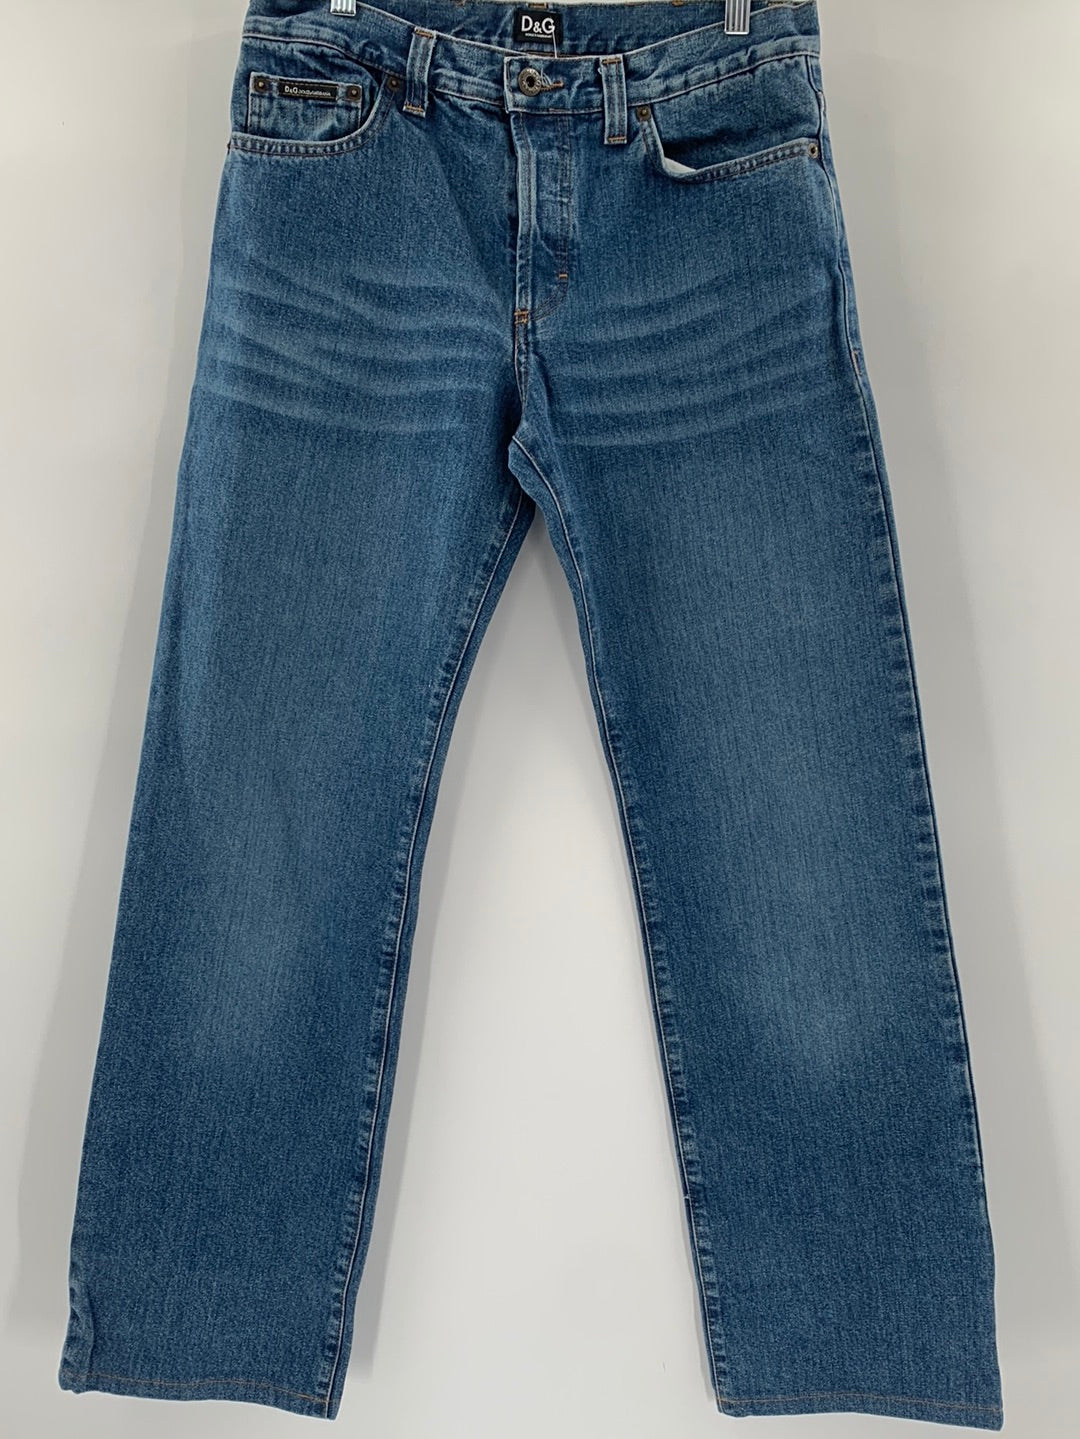 Dolce and Gabbana D & G Blue Jeans (32 X 46)